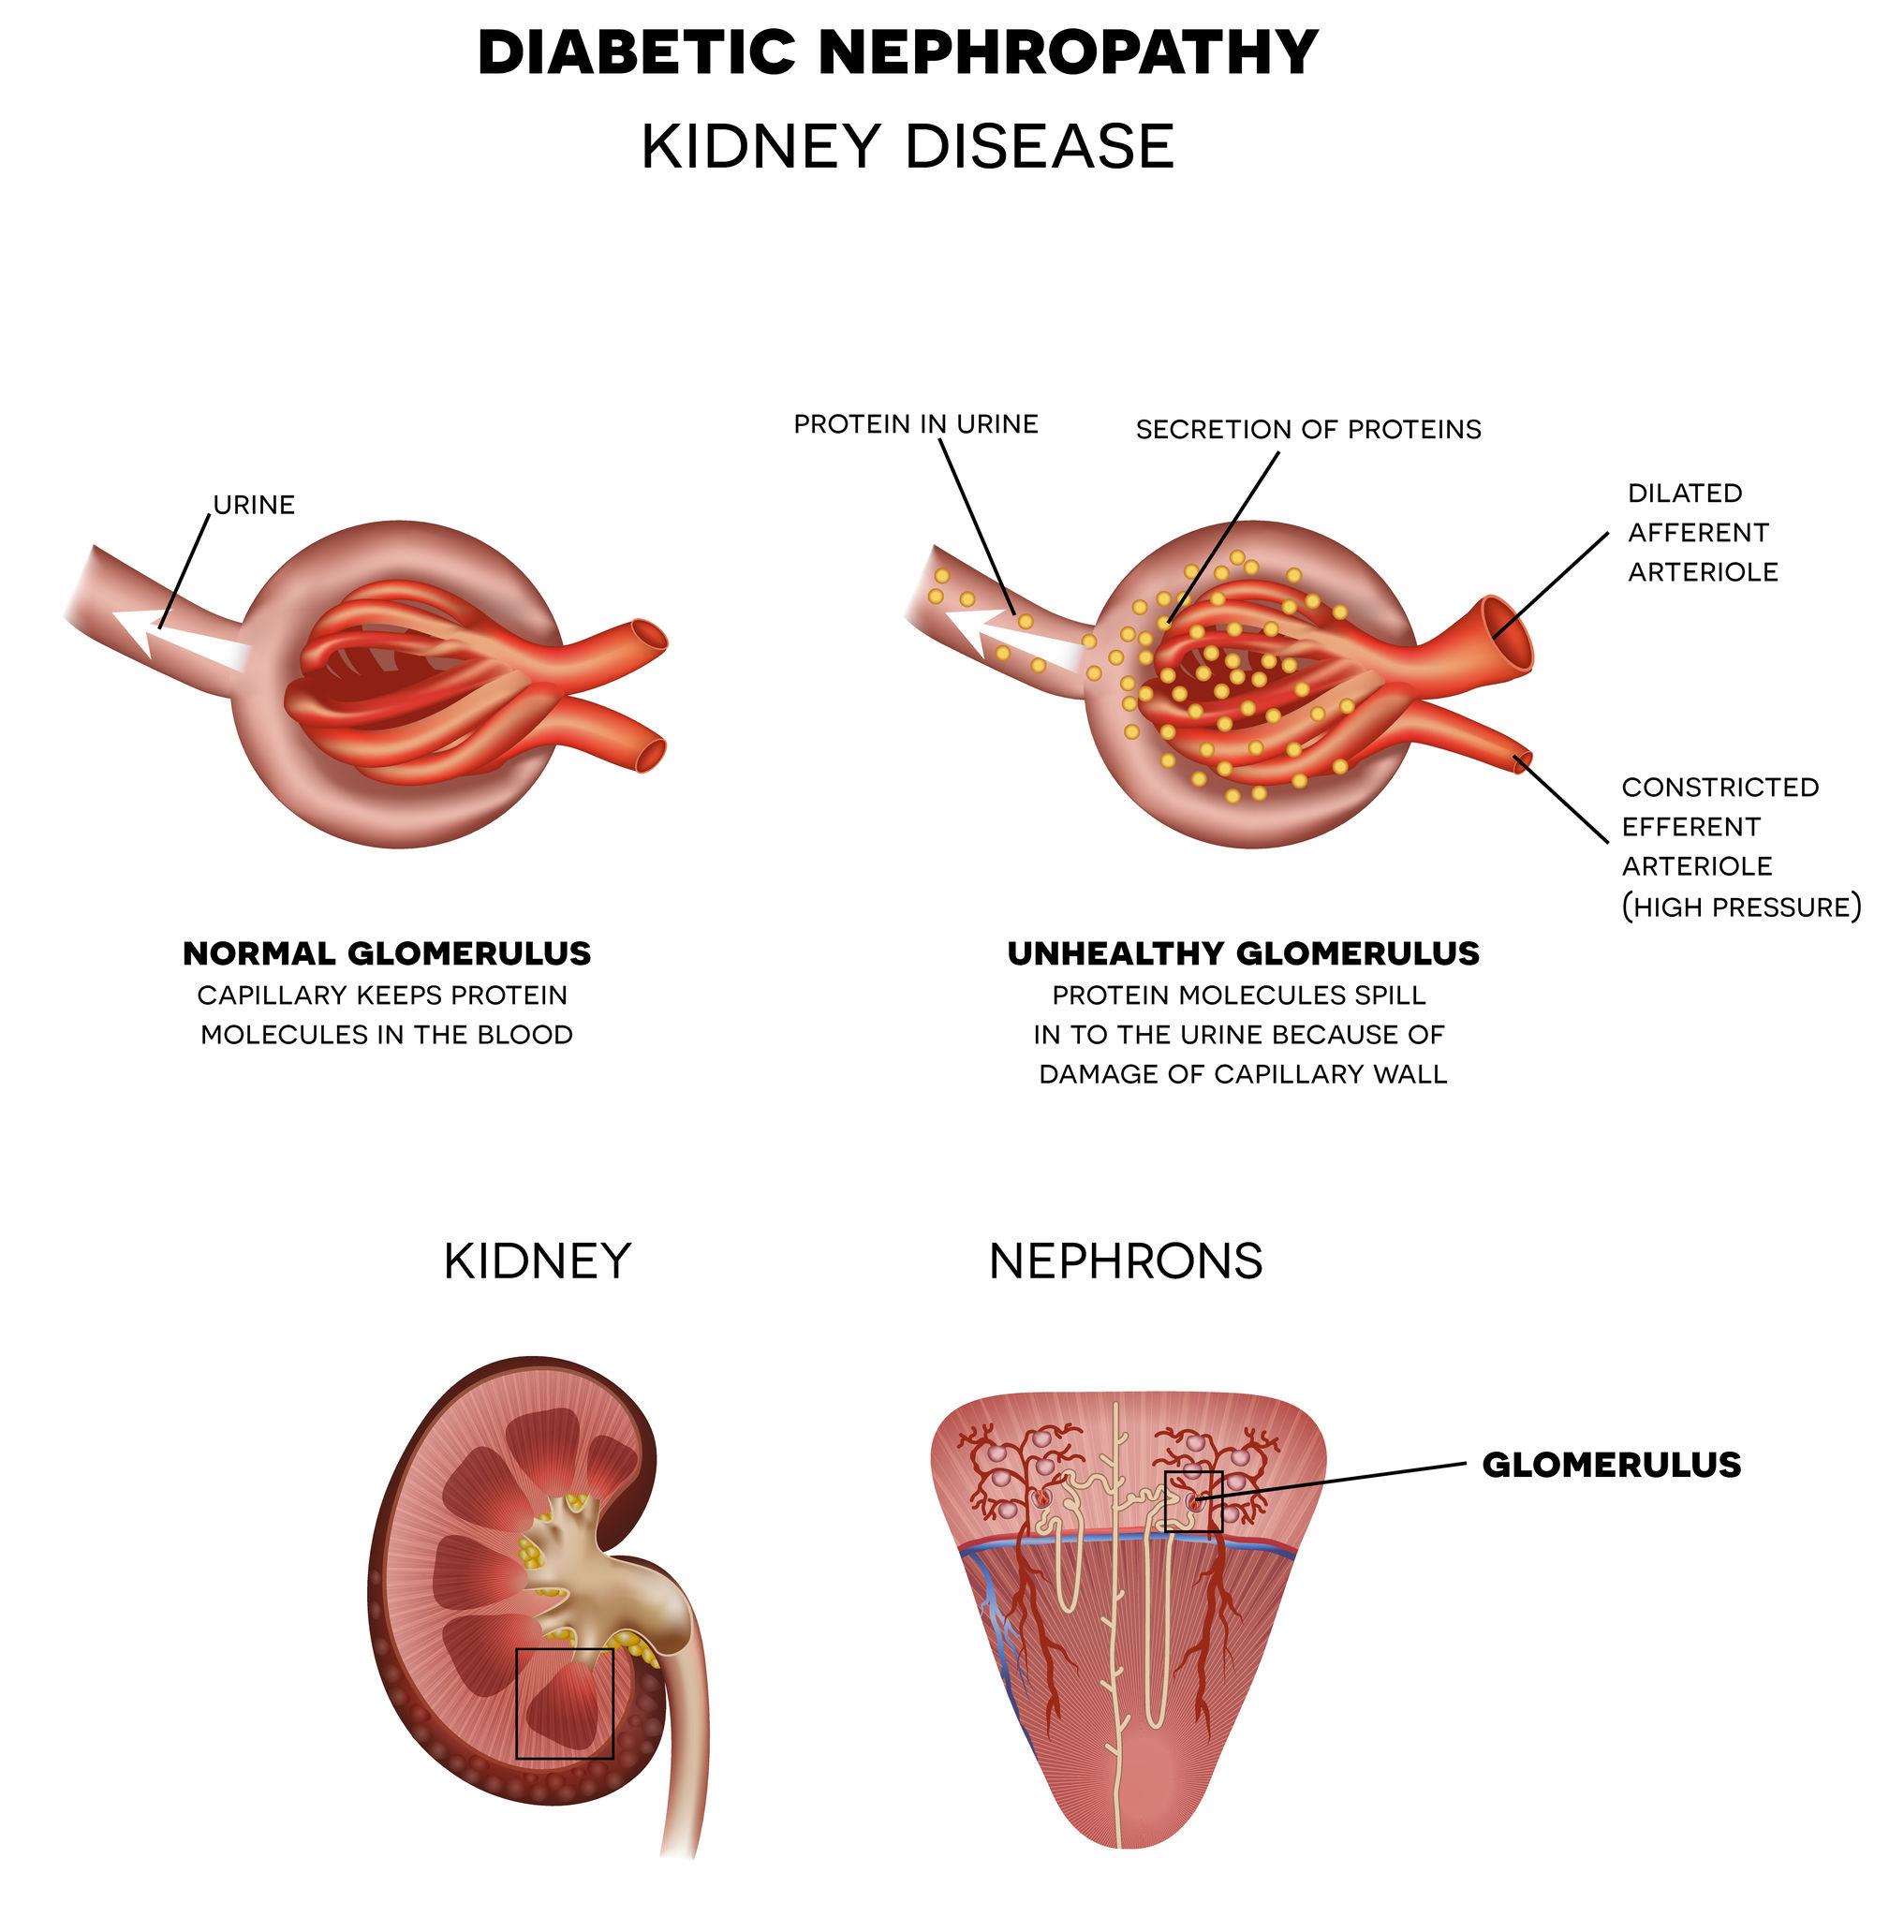 How Does Diabetes Affect The Kidneys Pathophysiology